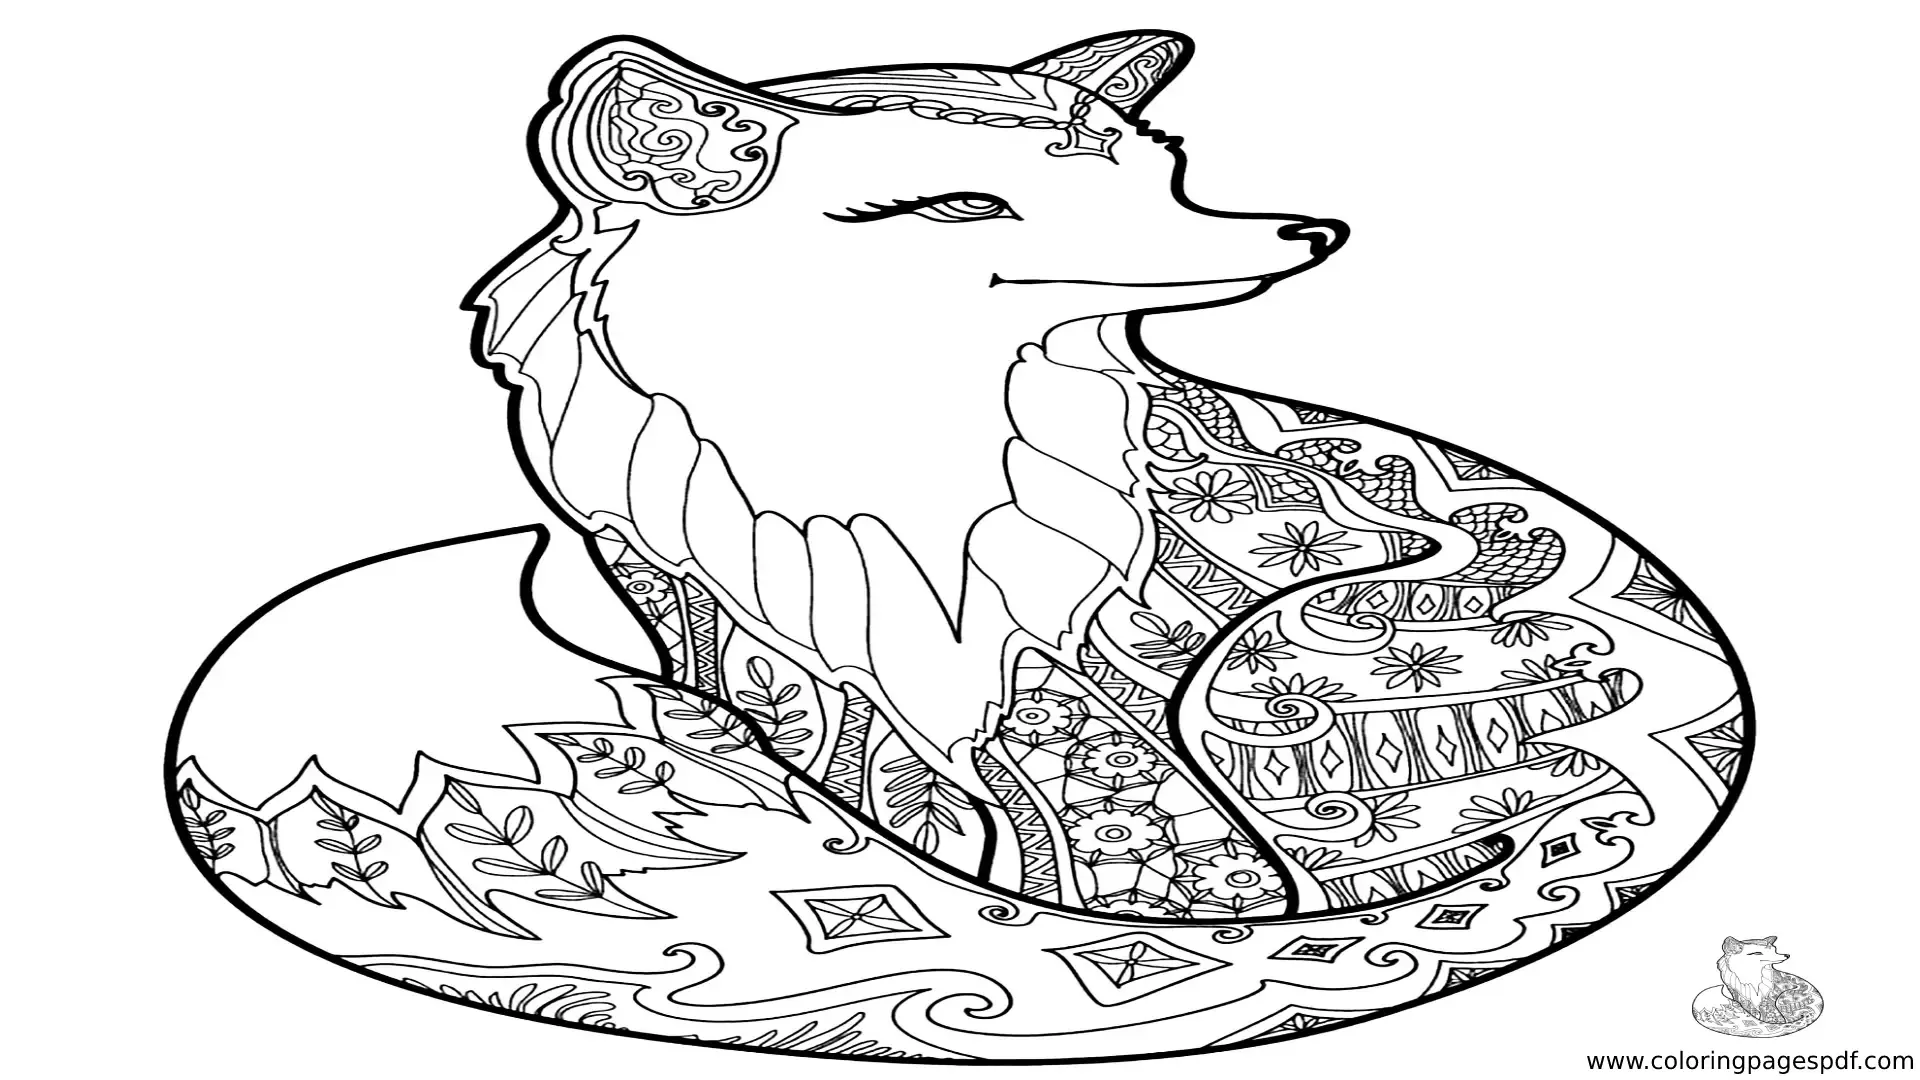 Coloring Pages Of A Fox Mandala